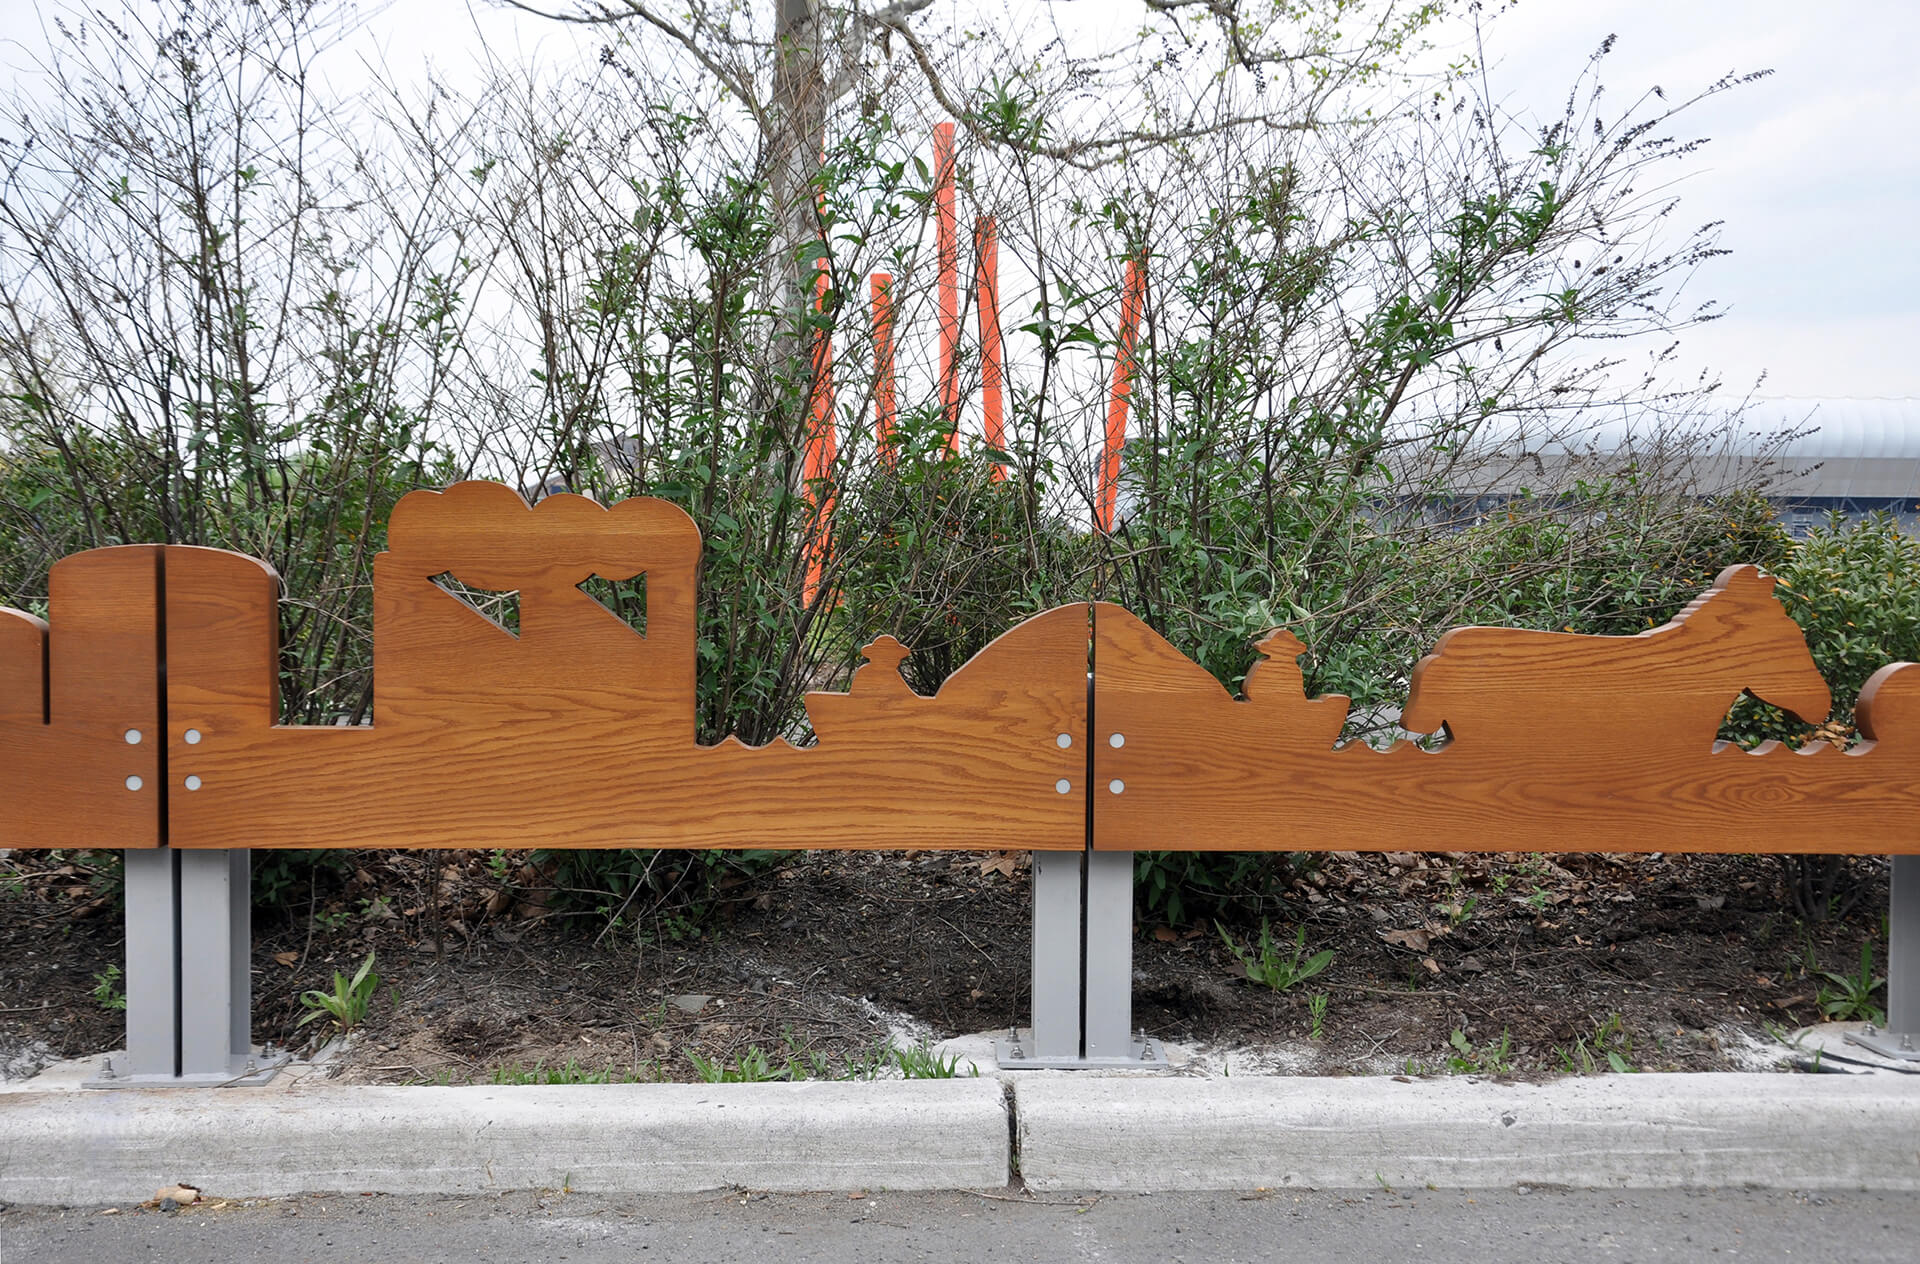 Newark Riverfront Park includes an orange boardwalk made of recycled PVC, a set of orange sticks, and various narrative installations on the park’s making, designed by Hector in collaboration with Weintraub Diaz Landscape Architecture and MTWTF for the City Of Newark, Essex County, and The Trust For Public Land.